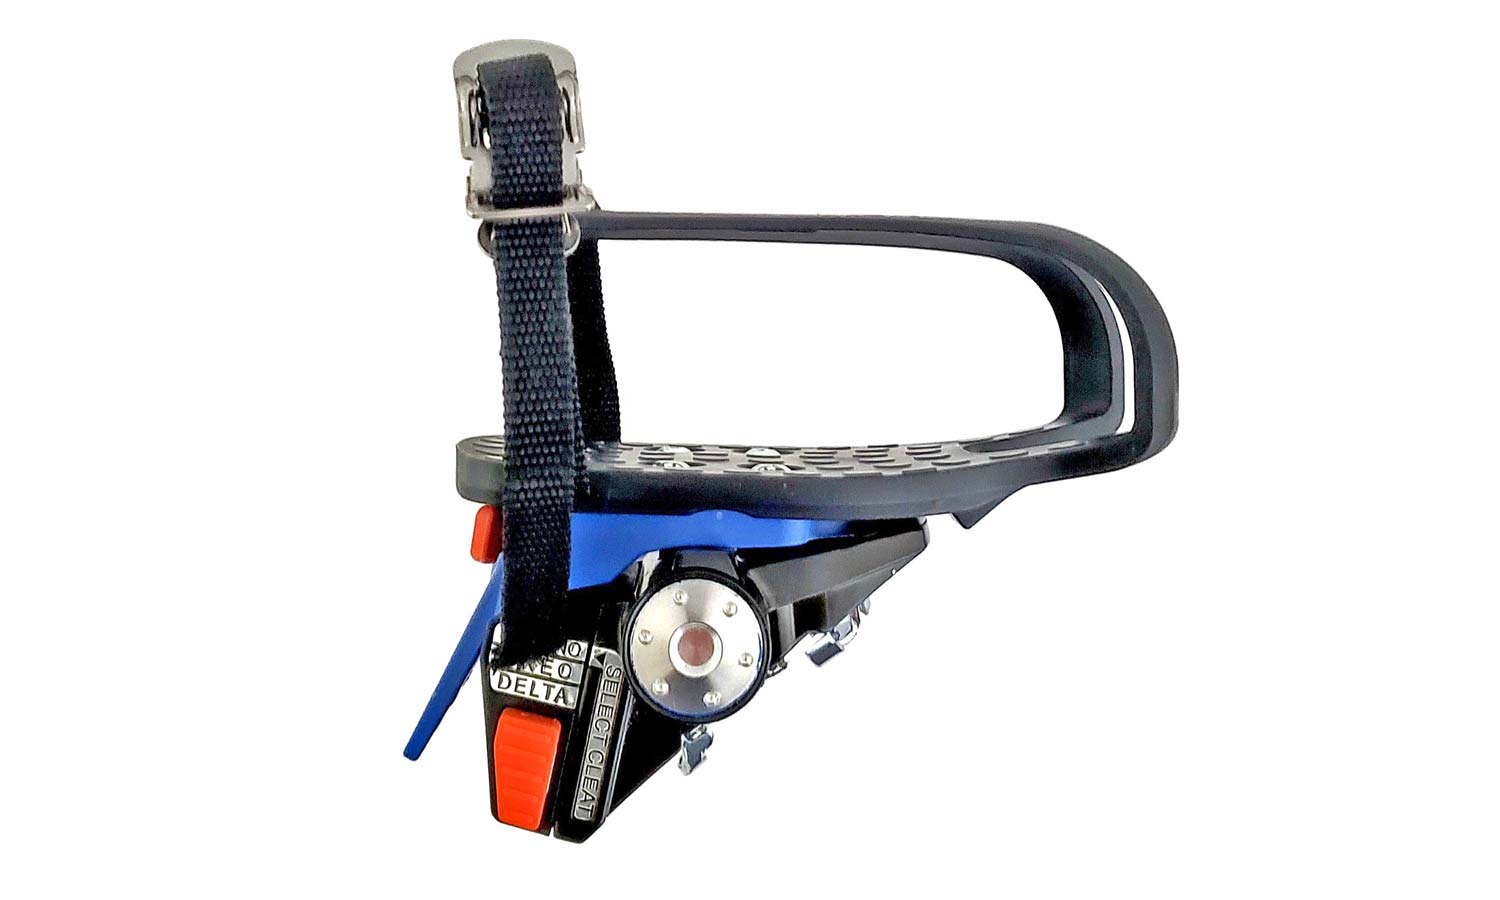 Fit5 universal Indoor Cycle Pedals; Look Delta or Keo, Shimano SPD-SL or SPD, toe-clip compatibility, side with toe-clips